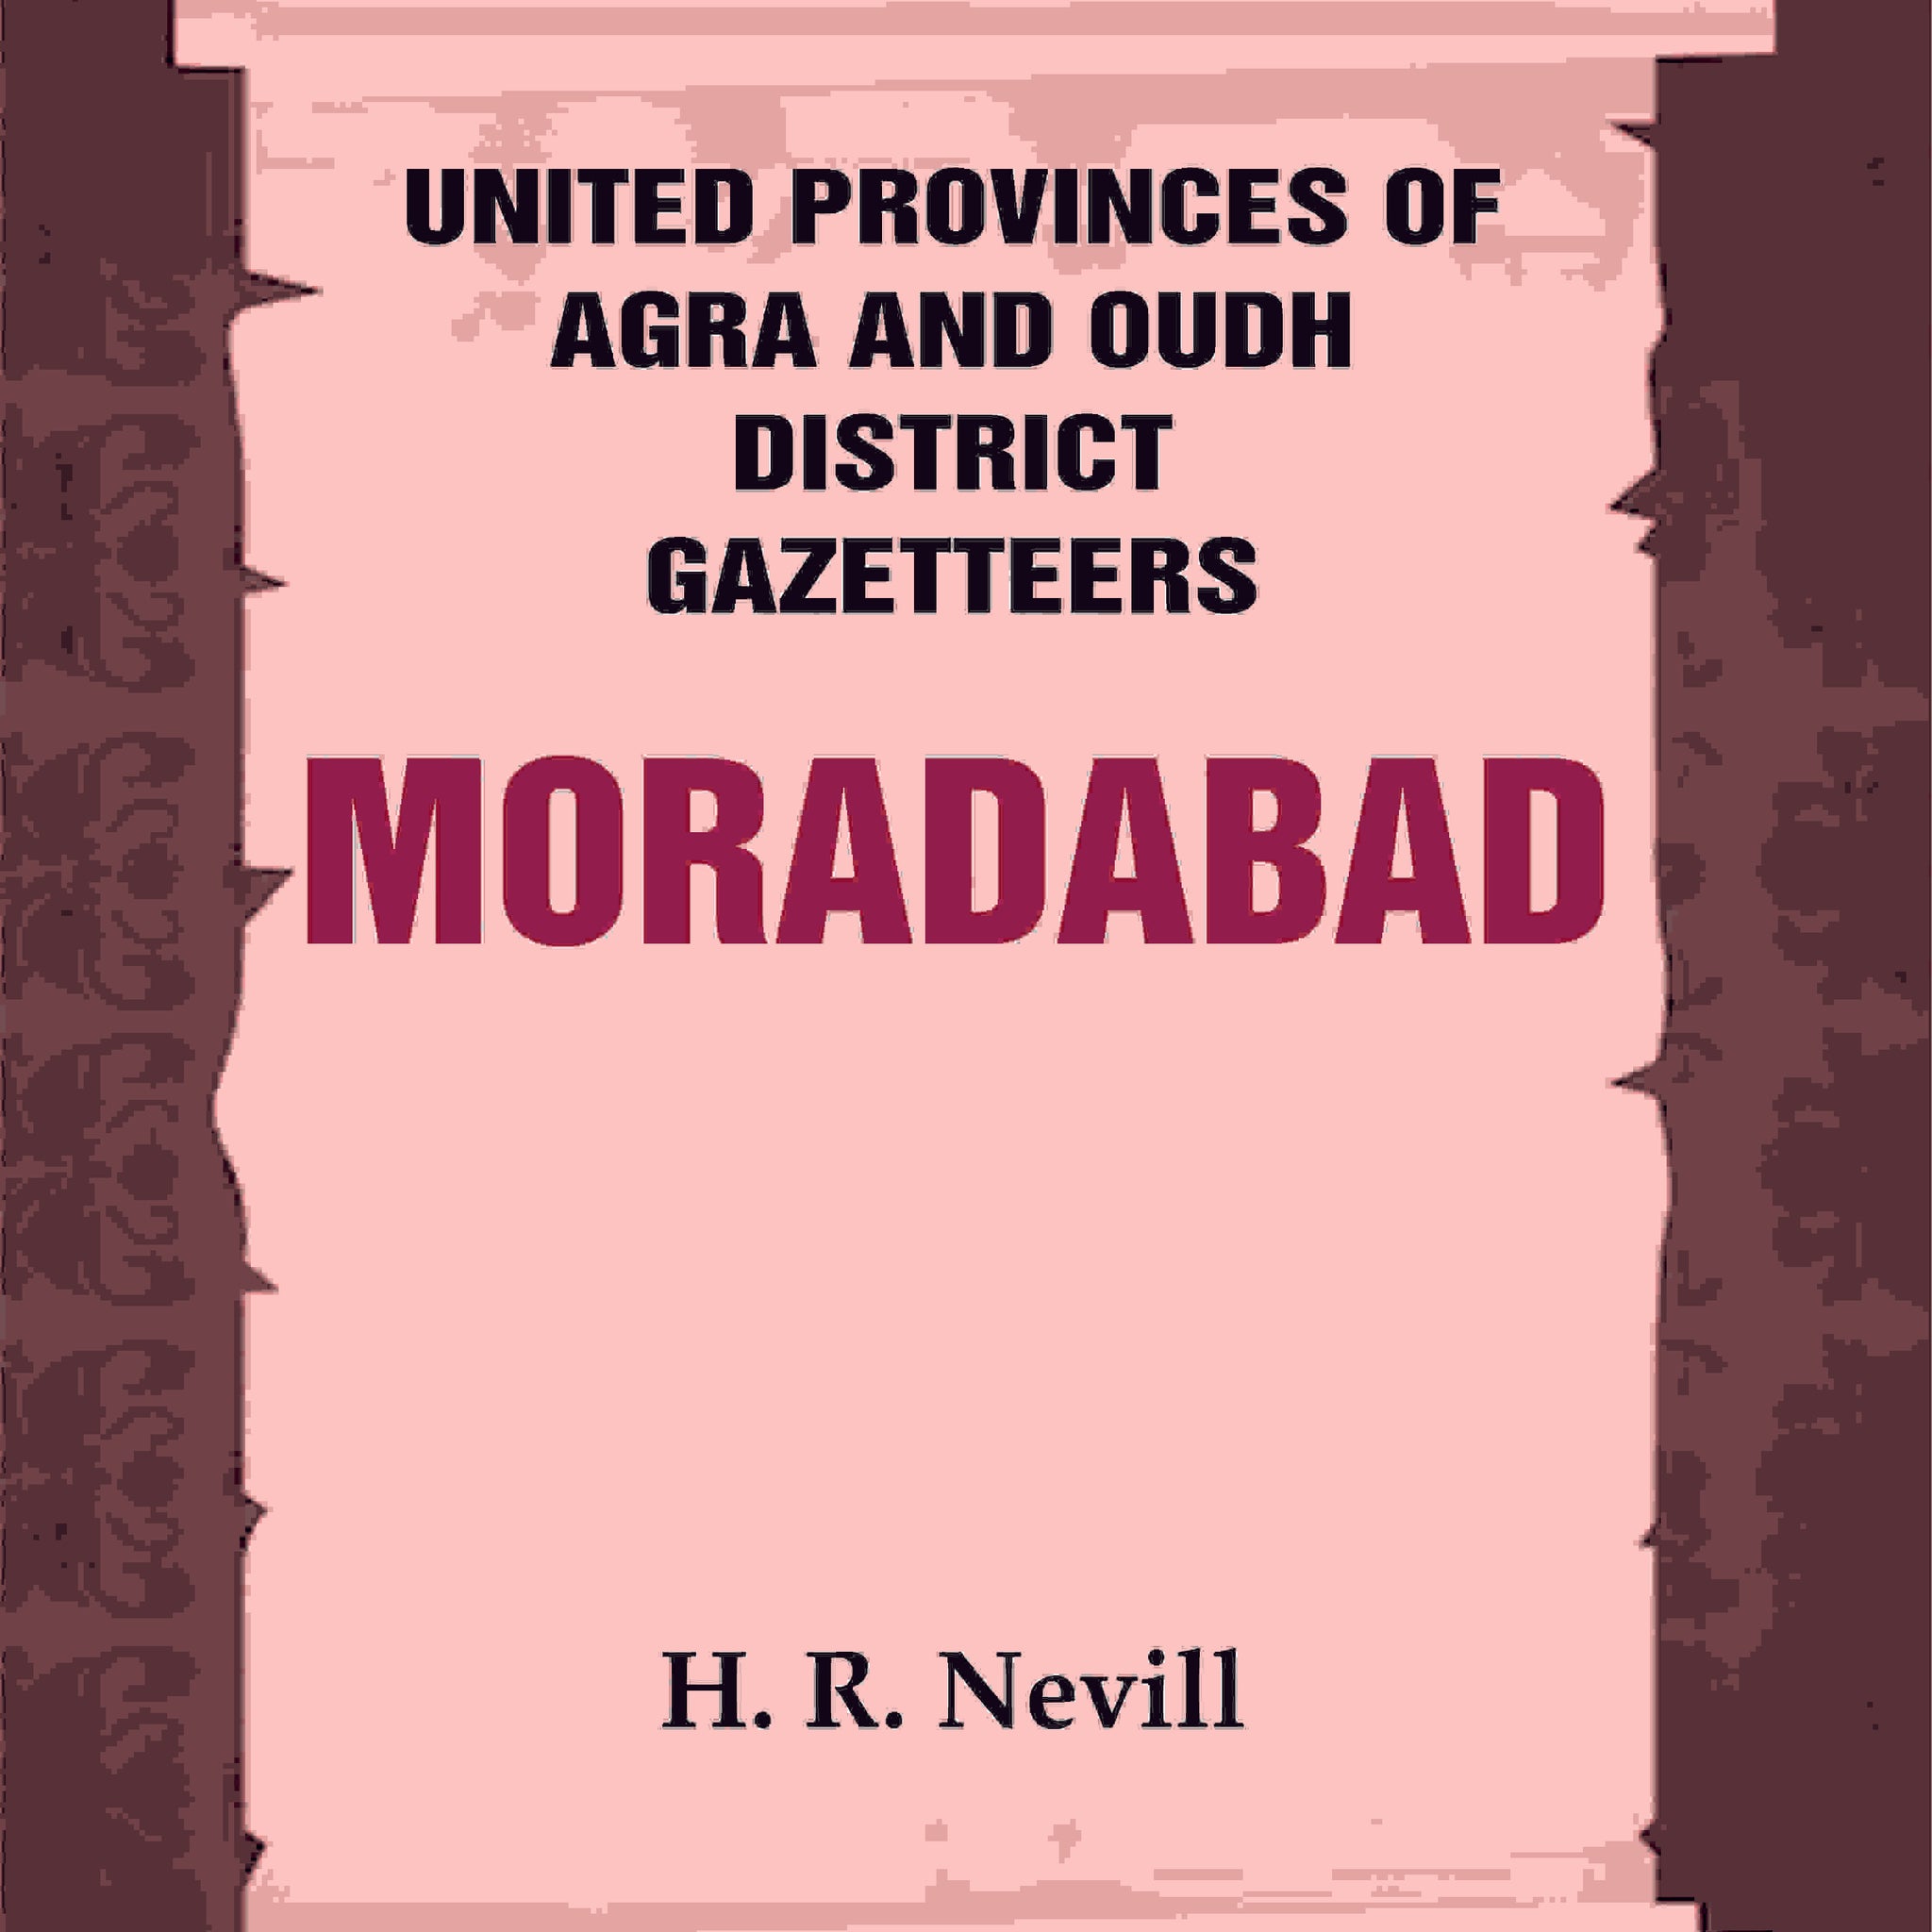 United Provinces of Agra and Oudh District Gazetteers: Moradabad